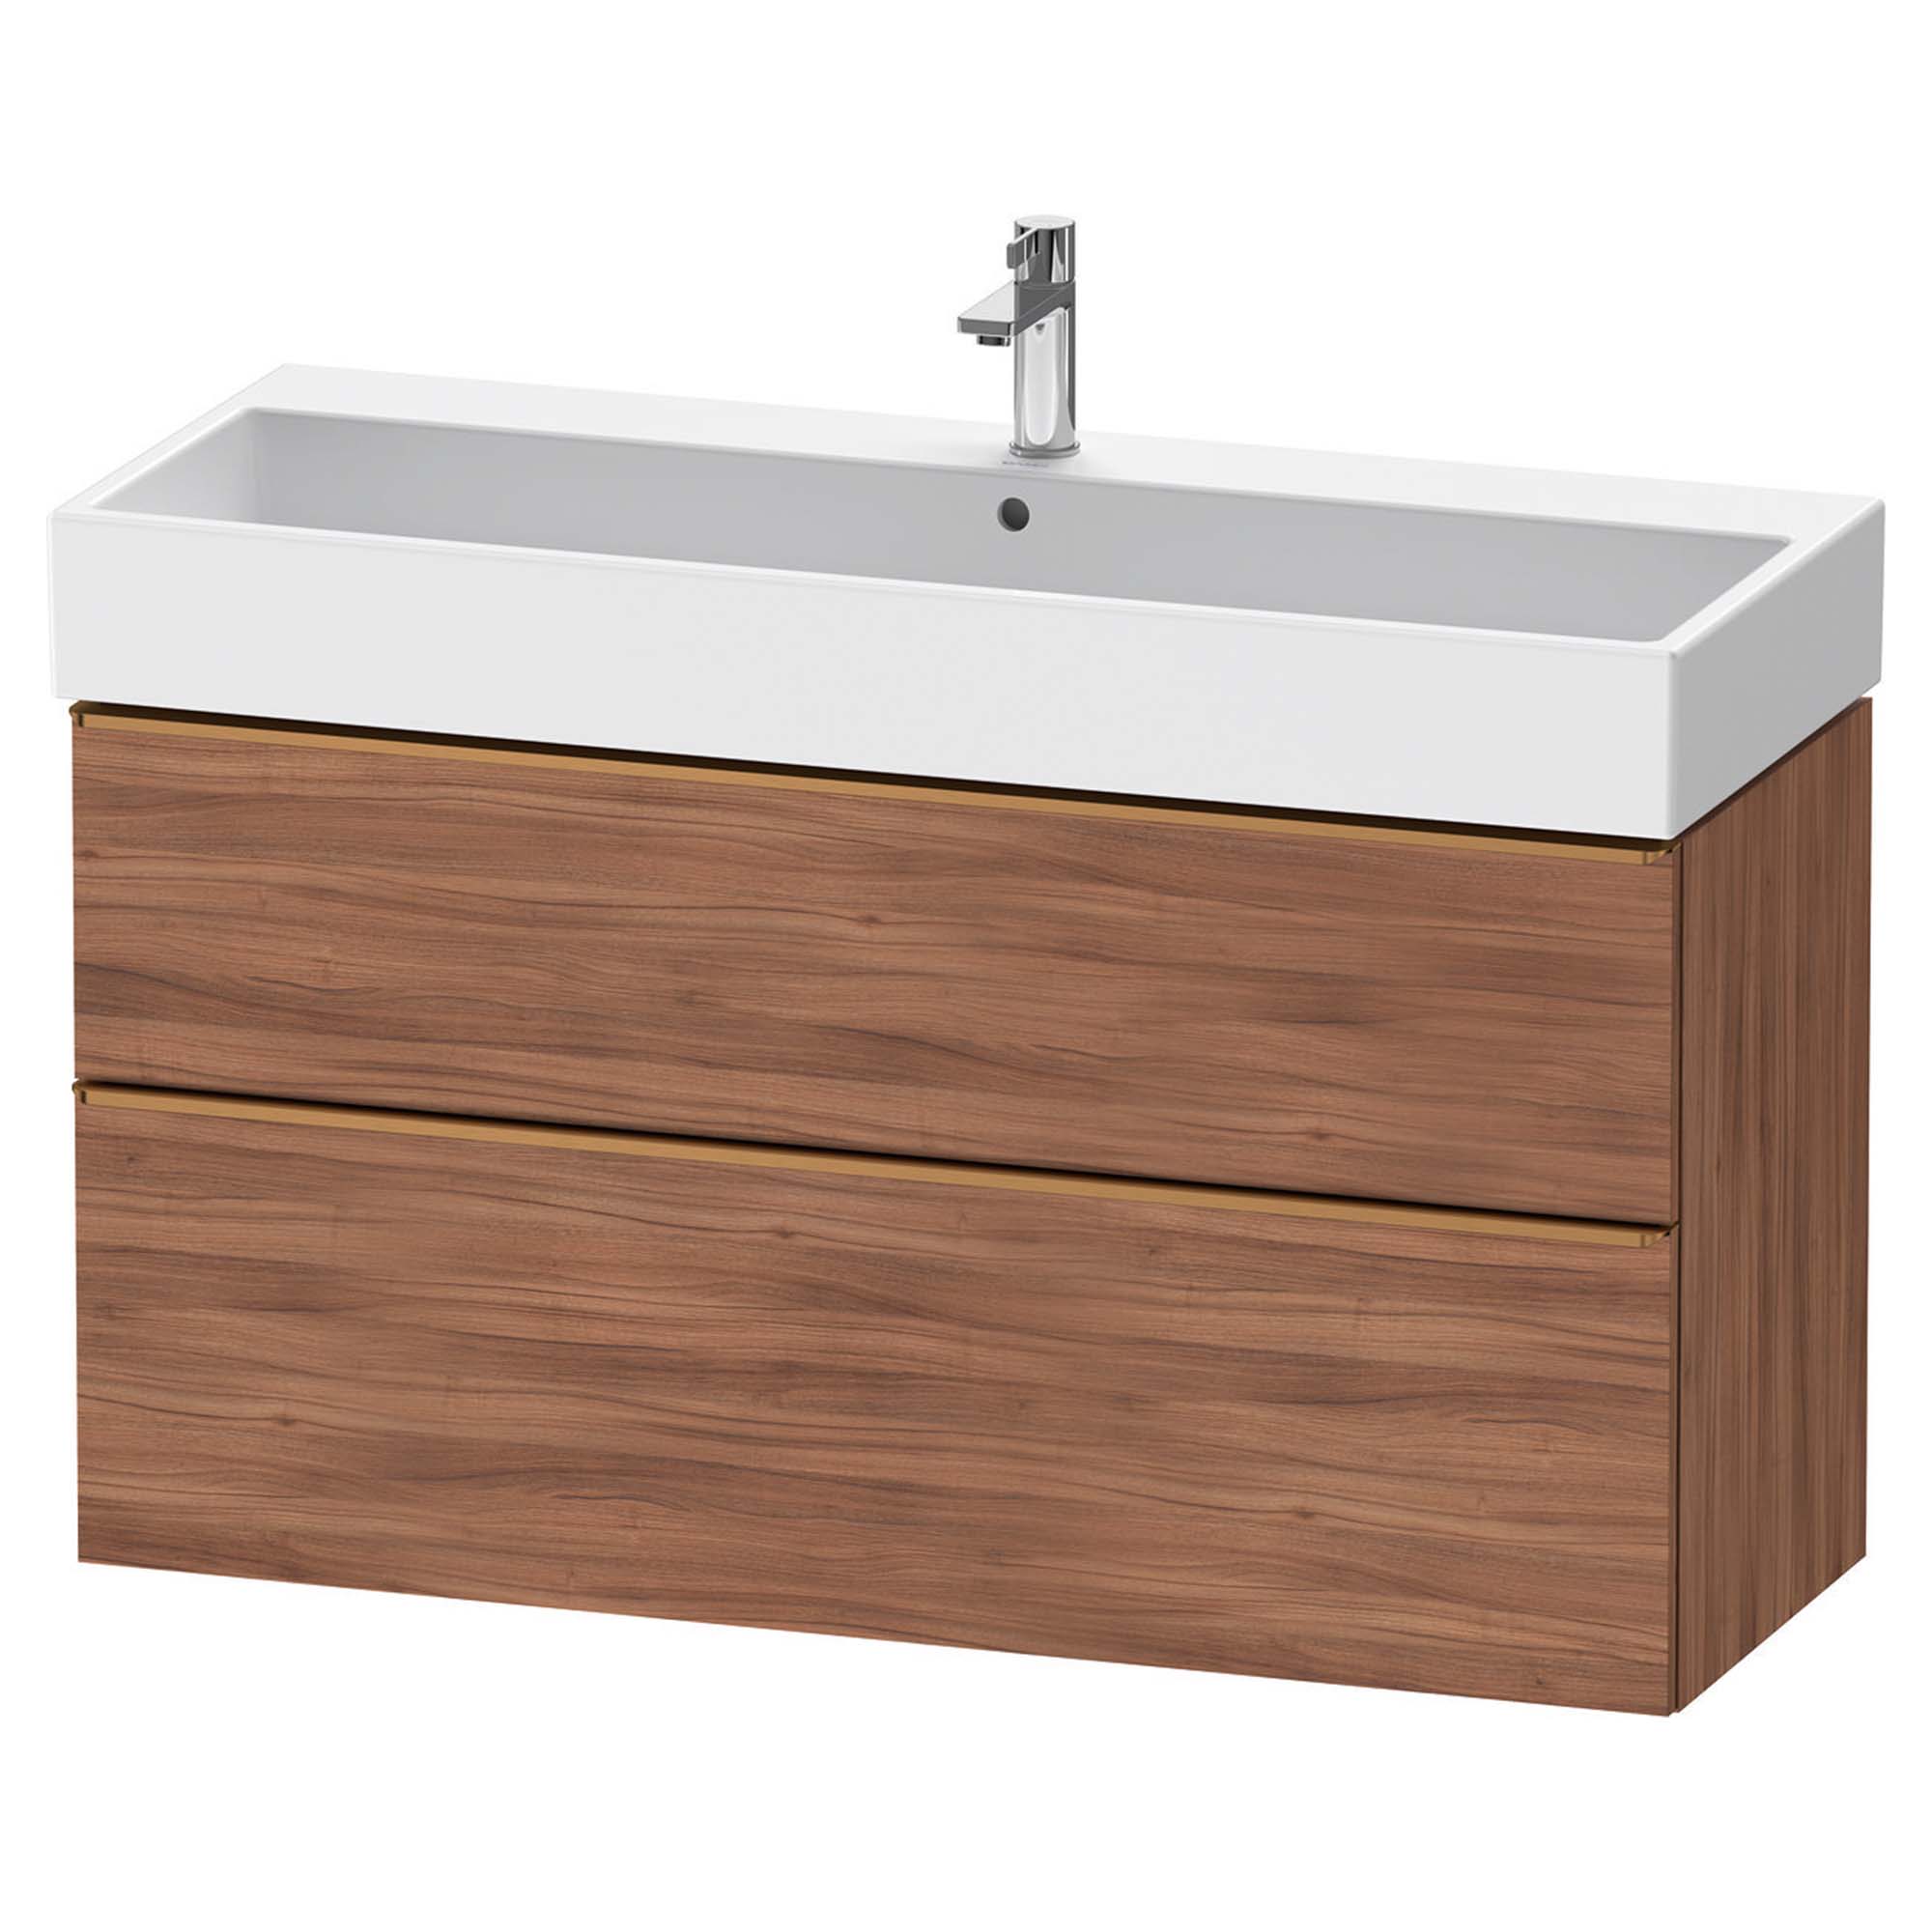 duravit d-neo 1200 wall mounted vanity unit with vero basin walnut brushed bronze handles